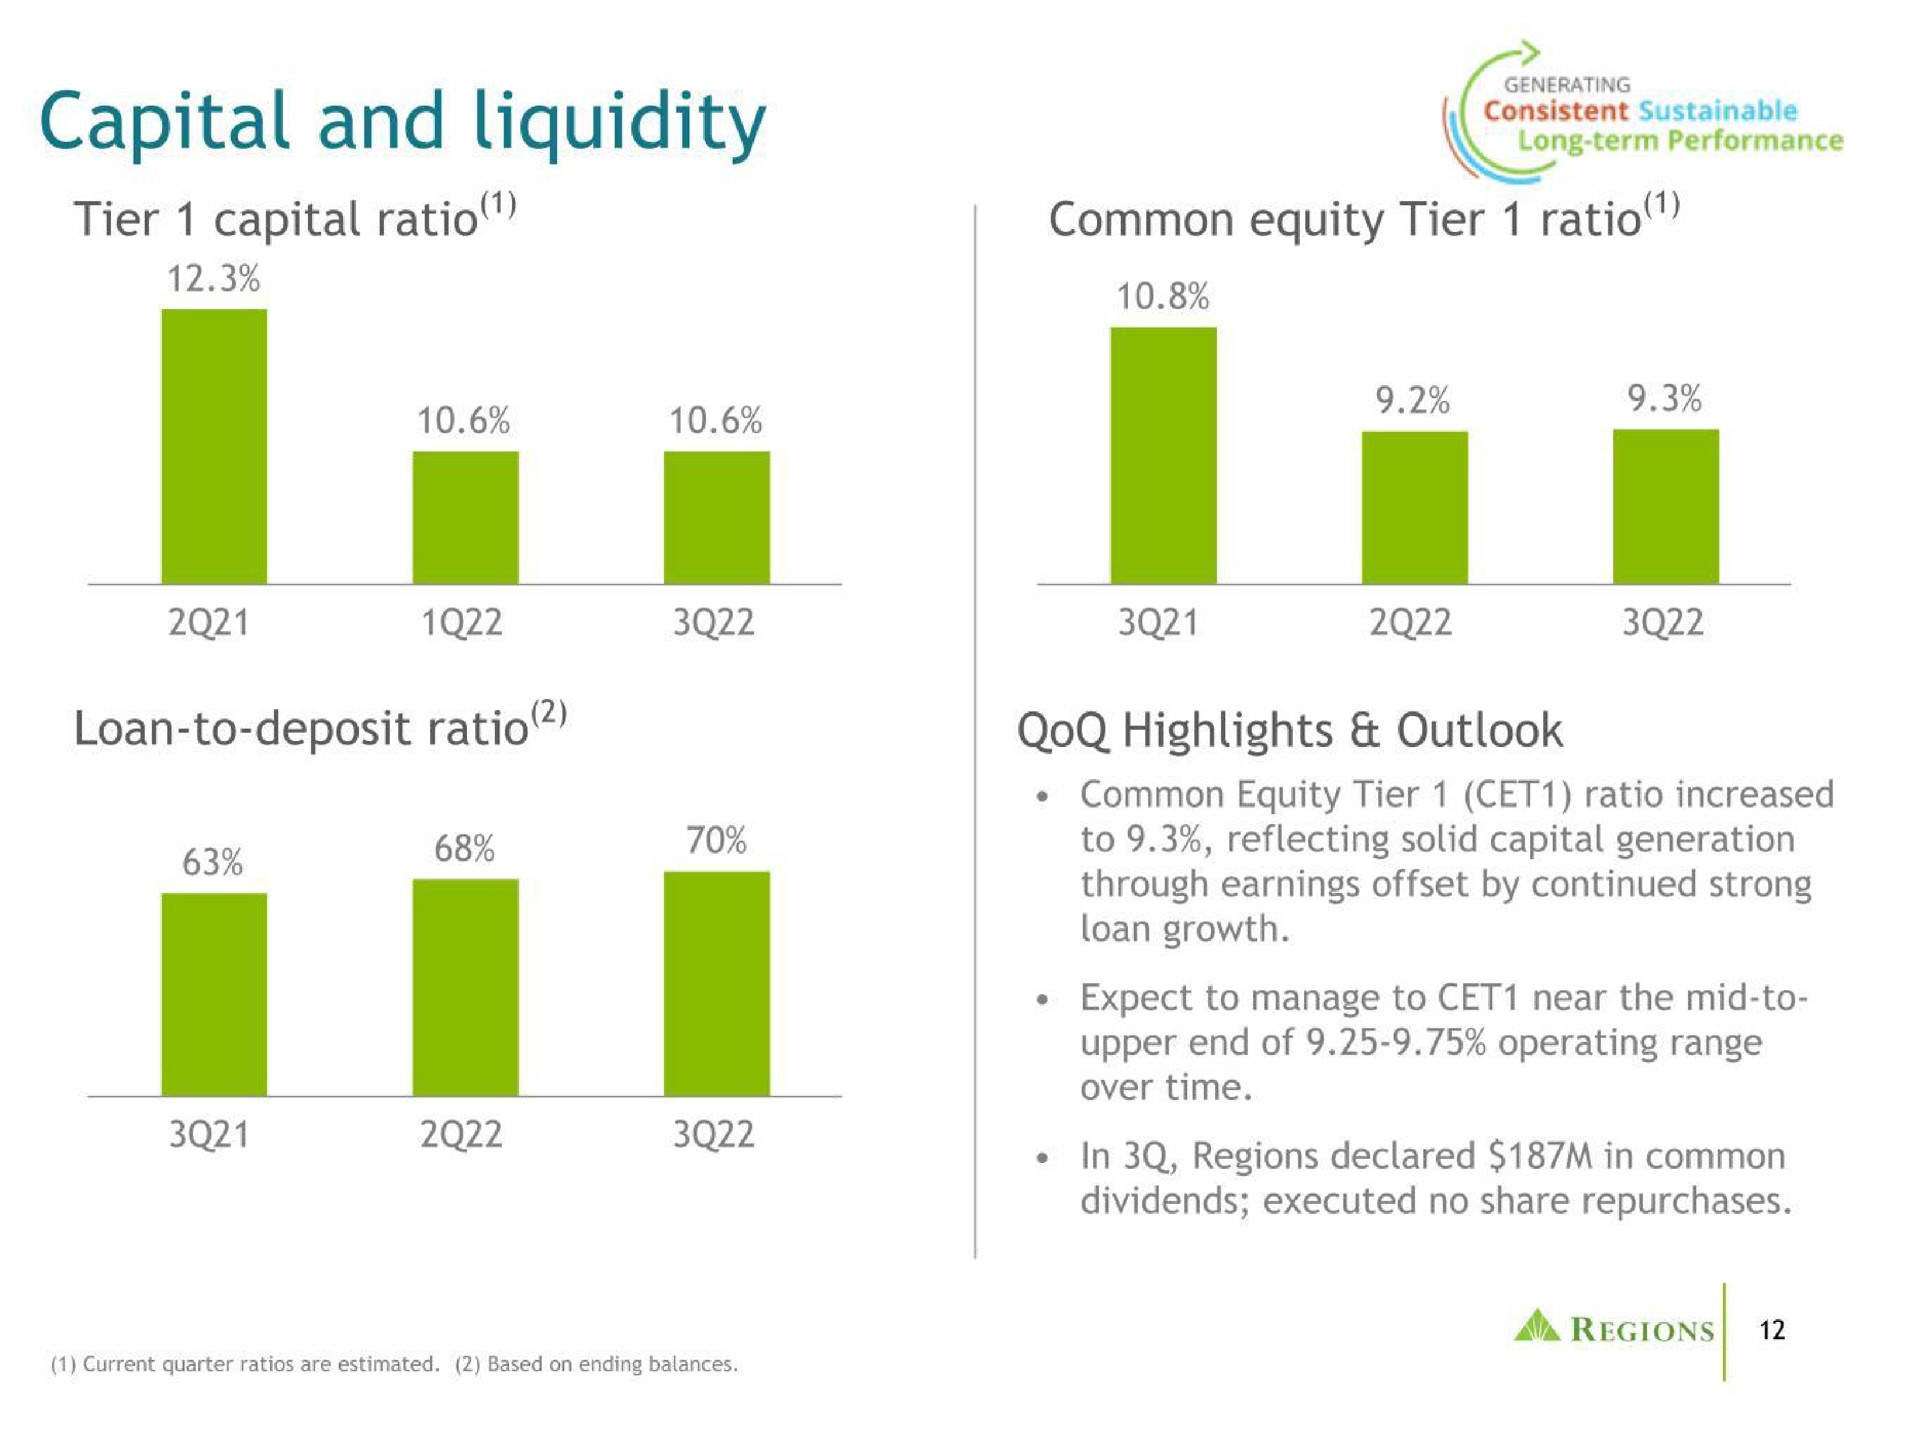 capital and liquidity tier capital ratio common equity tier ratio loan to deposit ratio highlights outlook | Regions Financial Corporation